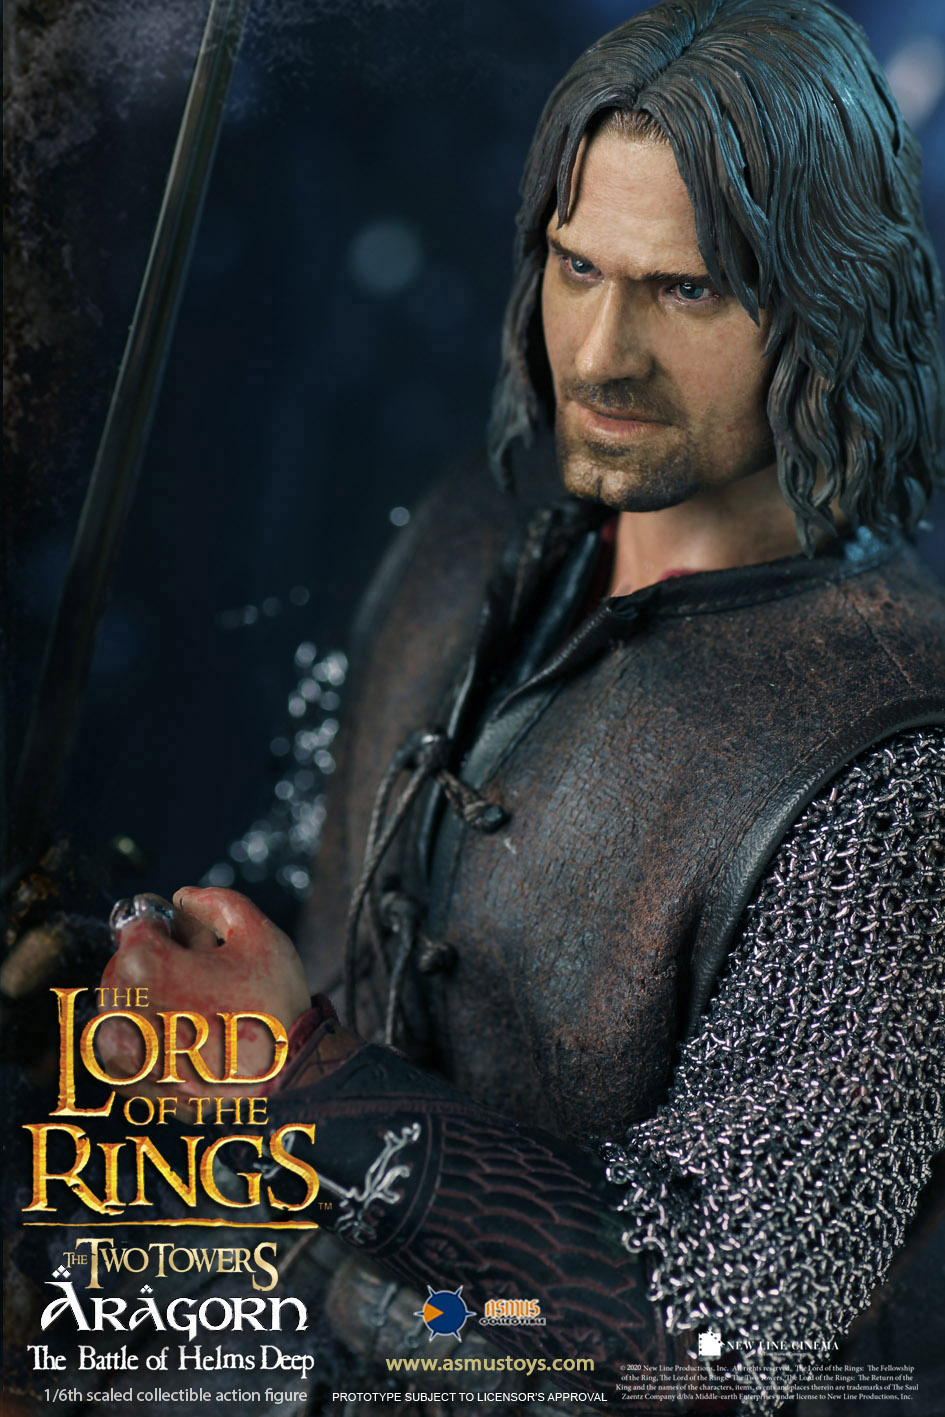 NEW PRODUCT: ASMUS: ARAGORN : THE BATTLE OF HELM'S DEEP 1/6 SCALE FIGURE (Standard & Deluxe editions) Abhd0017